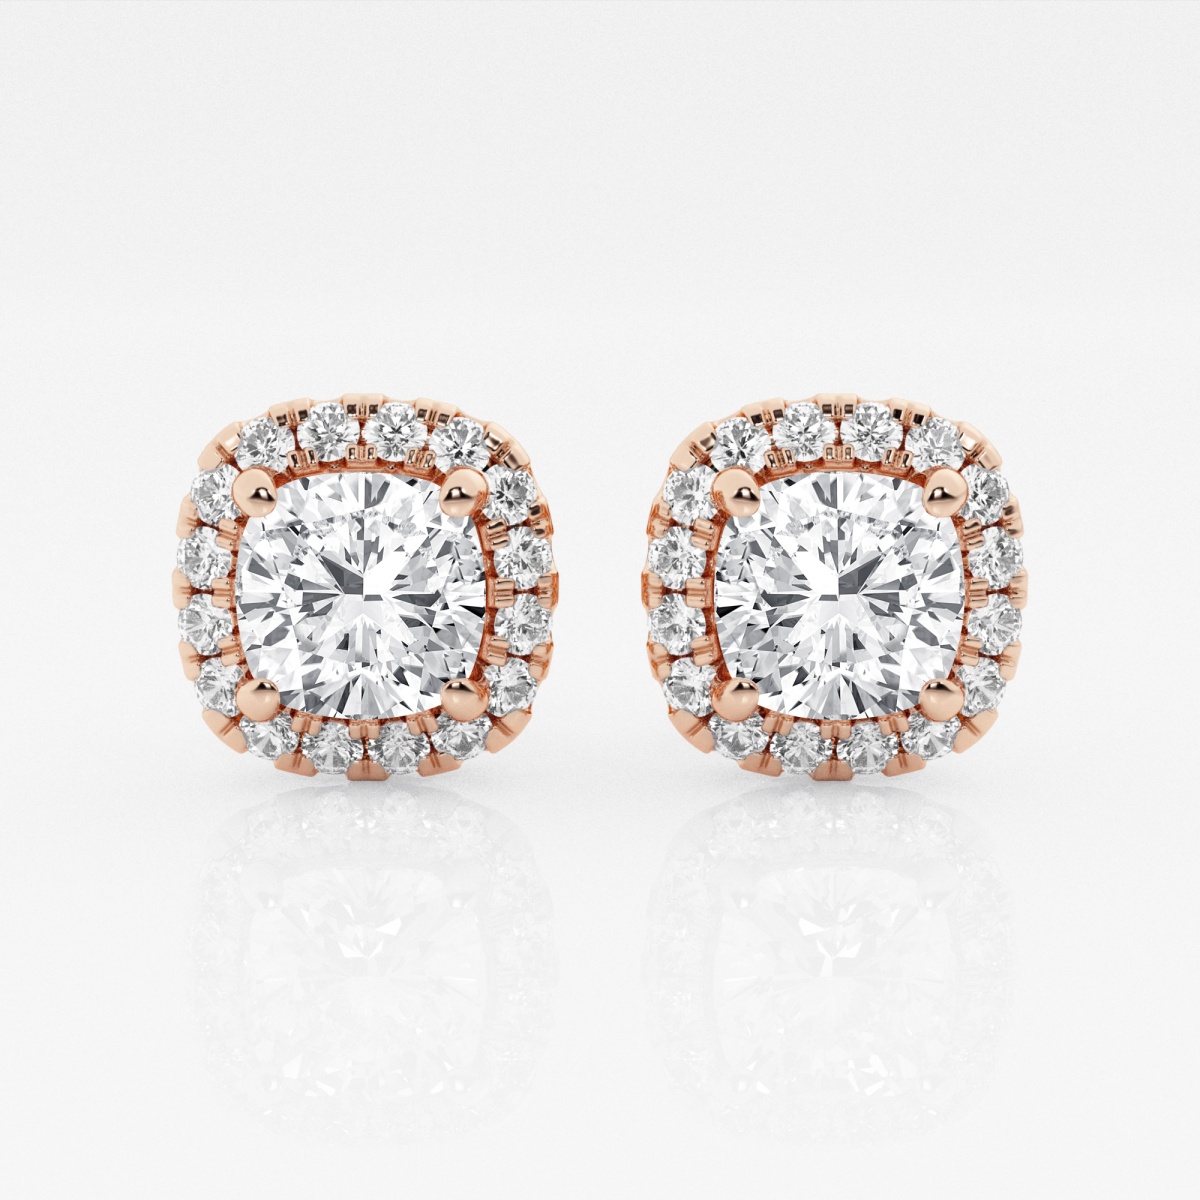 Additional Image 2 for  3 1/2 ctw Cushion Lab Grown Diamond Halo Certified Stud Earrings